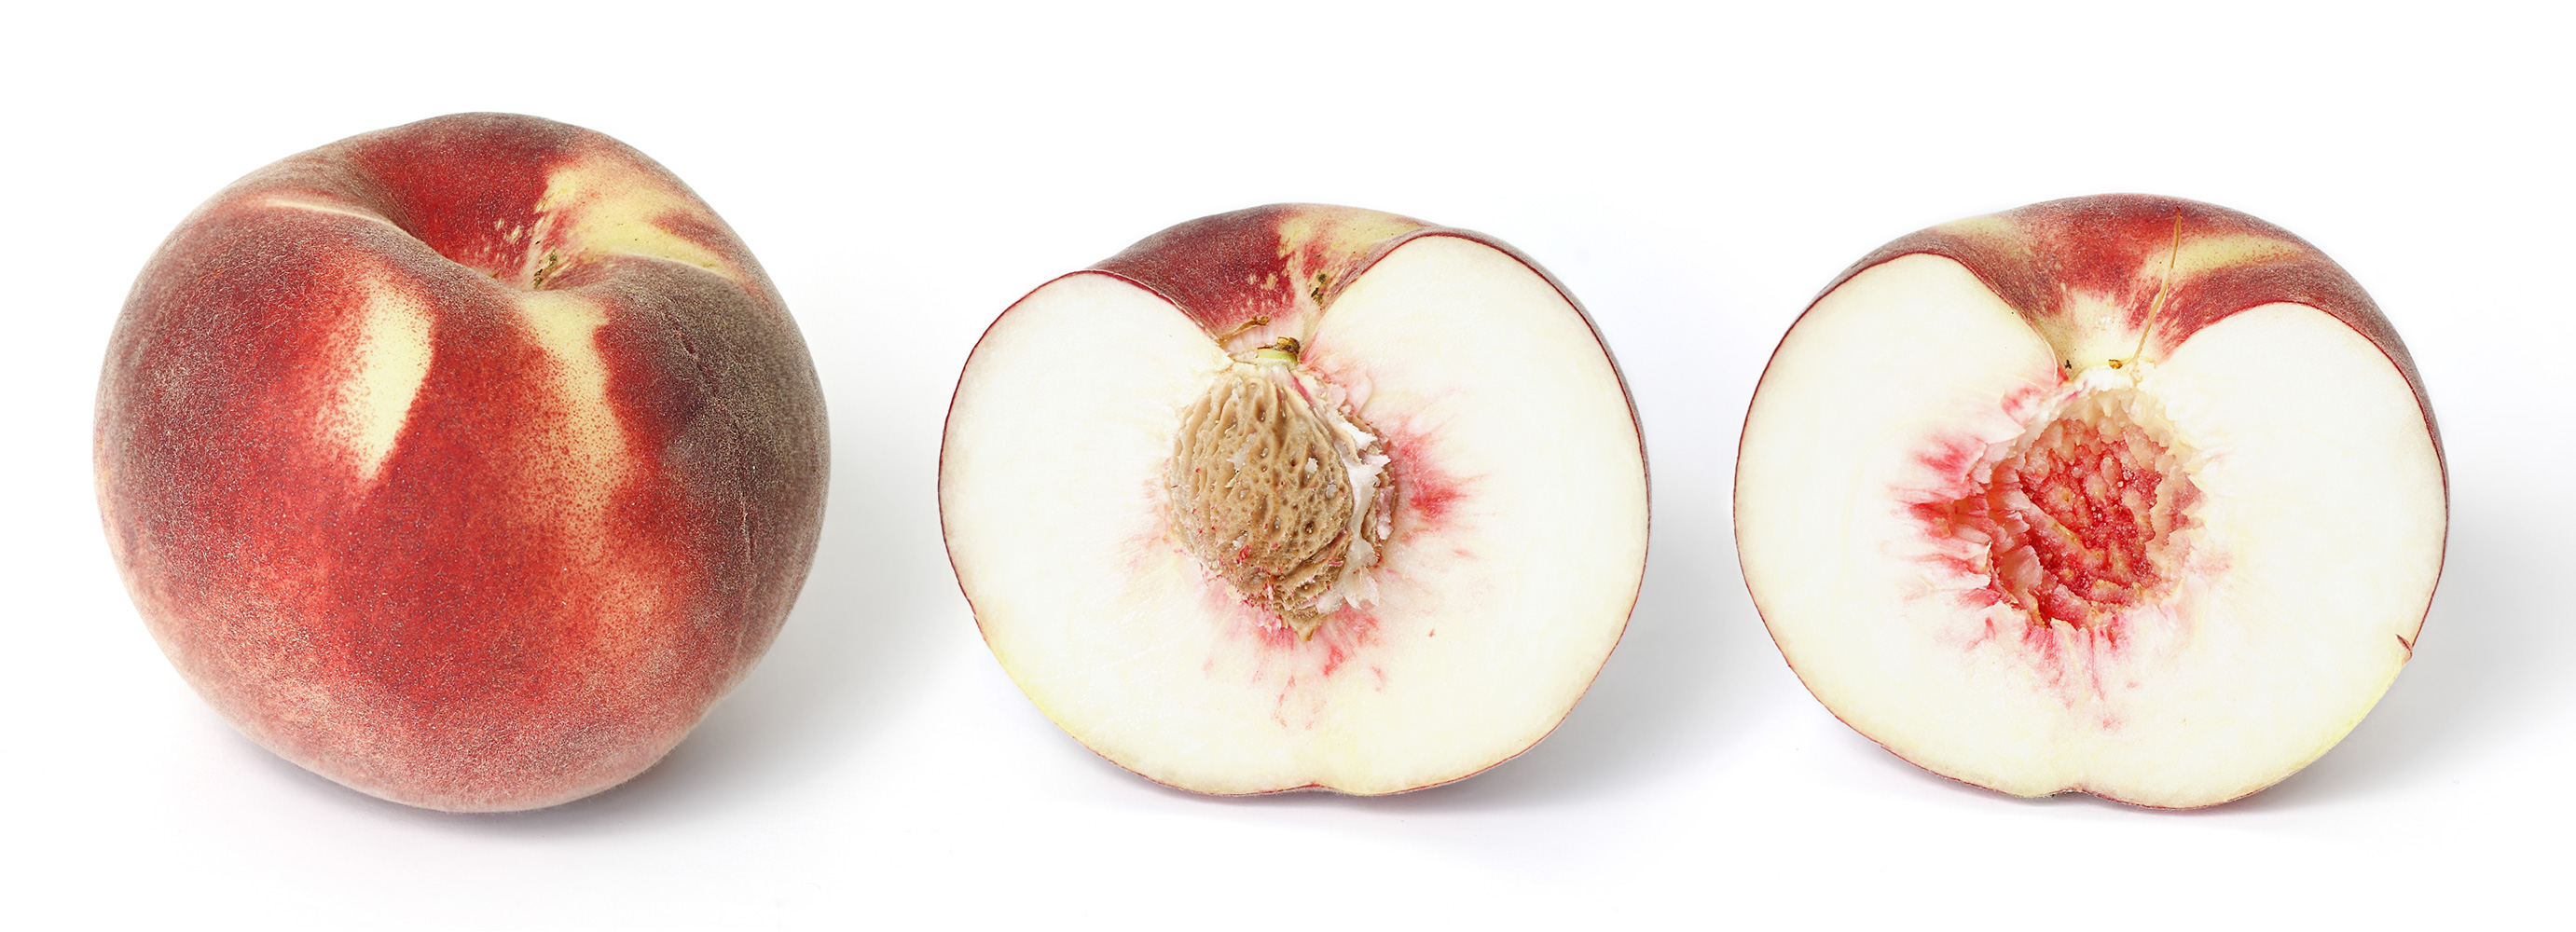 White peach and cross section02